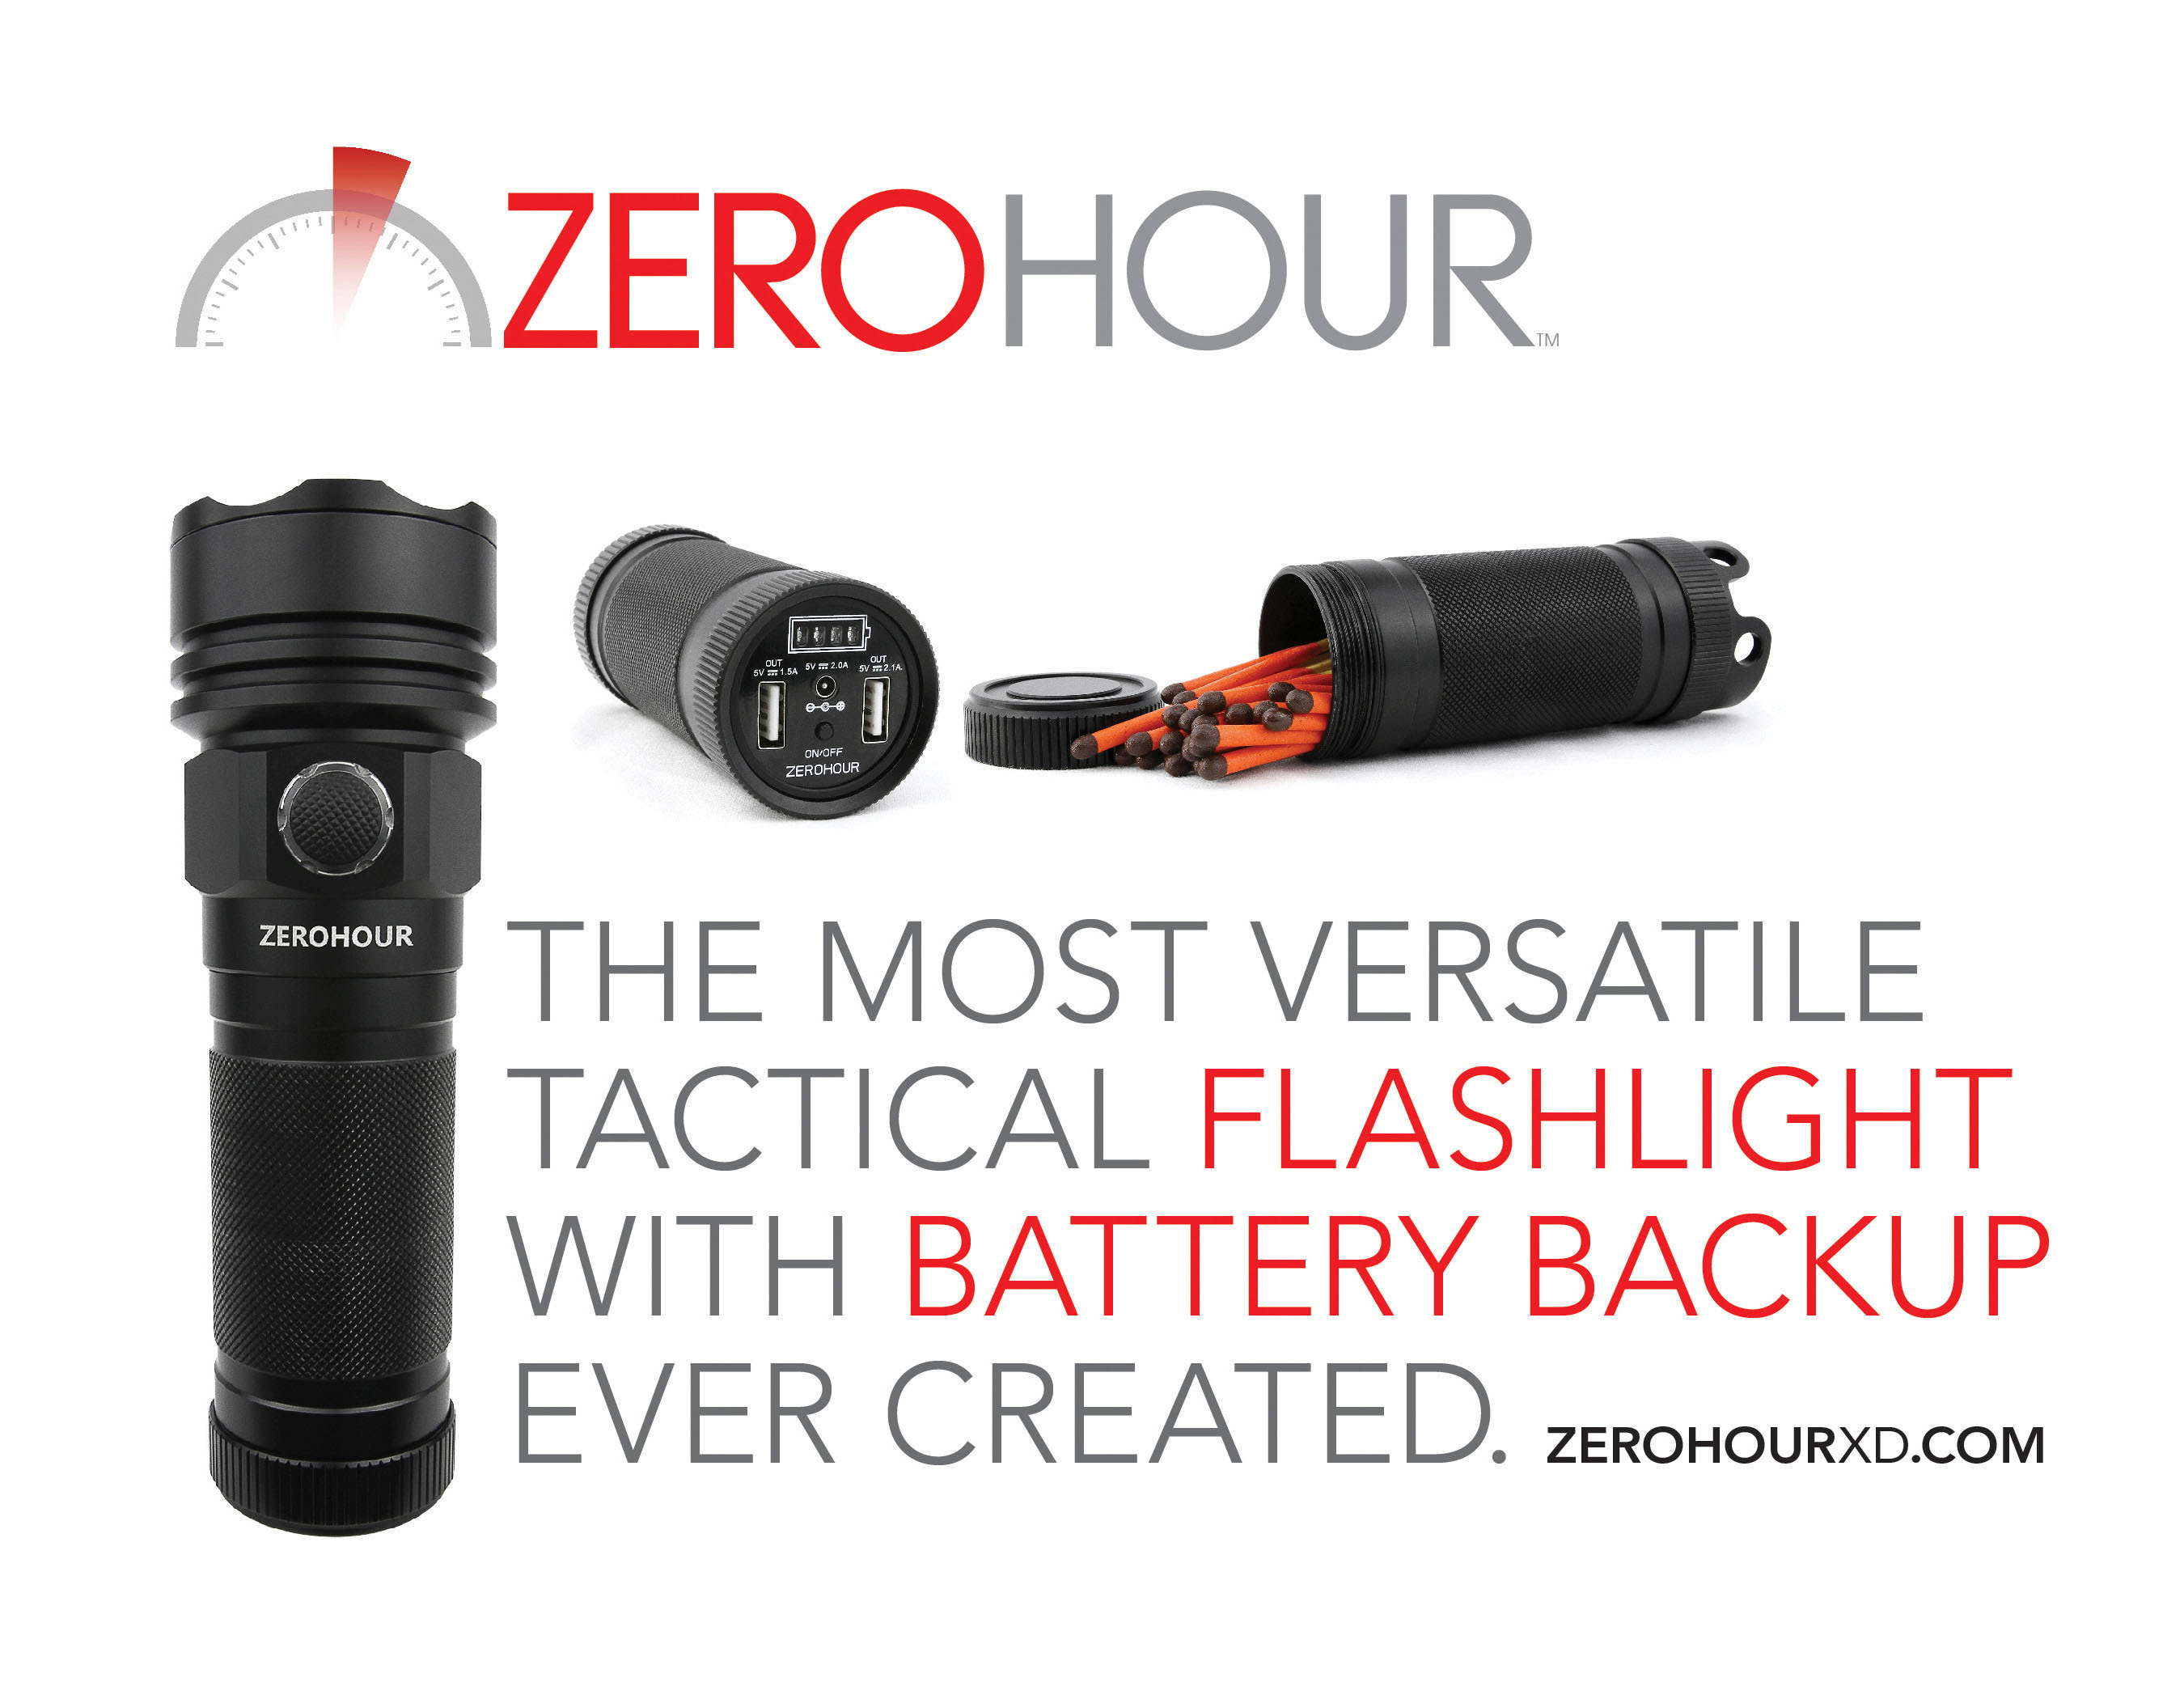 ZeroHour is a tactical-grade flashlight integrated with a USB Battery Backup that can charge smartphones, tablets, and other USB devices. (PRNewsFoto/ZEROHOUR INNOVATIONS) (PRNewsFoto/ZEROHOUR INNOVATIONS)